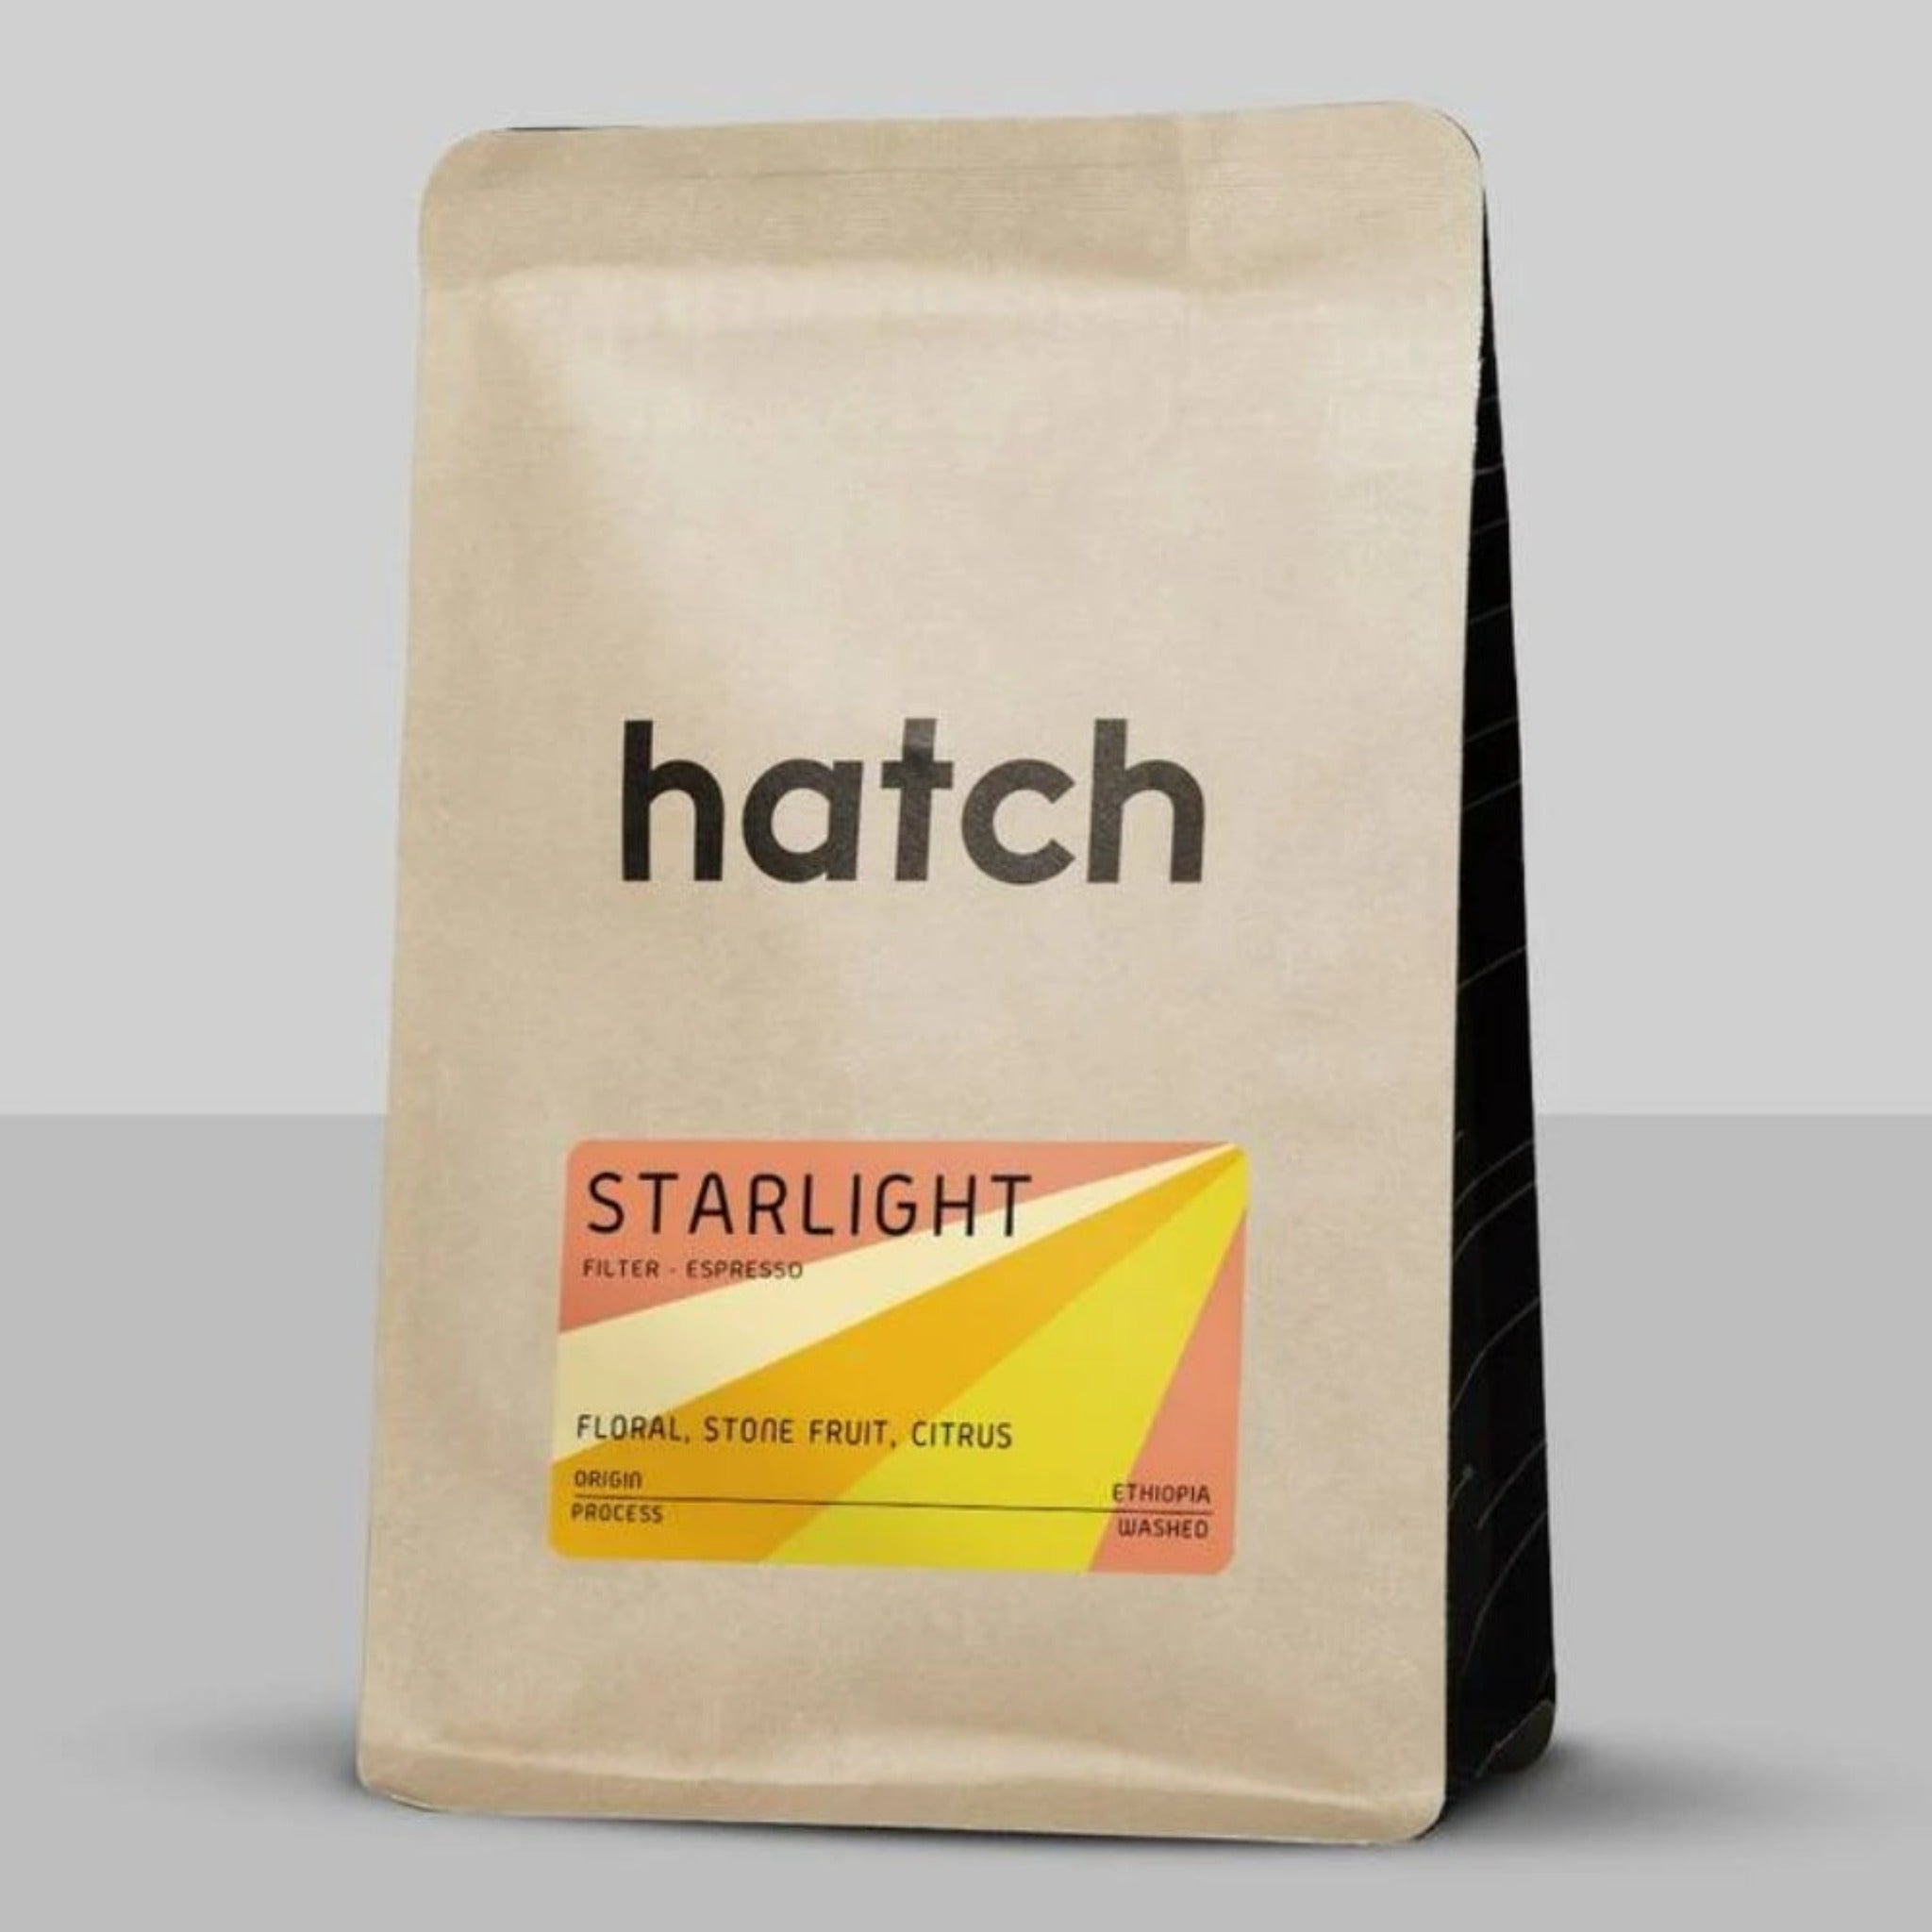 Hatch Coffee - Starlight: Explore a journey of flavor with this versatile medium-light roast from Bombe Village, Sidama Bensa, Ethiopia. Delight in floral, stonefruit, and citrus notes, perfect for both vibrant espressos and filter brews. Discover more about our core coffee offerings: Supernova, Starlight, Gamma, and Blackout blends.